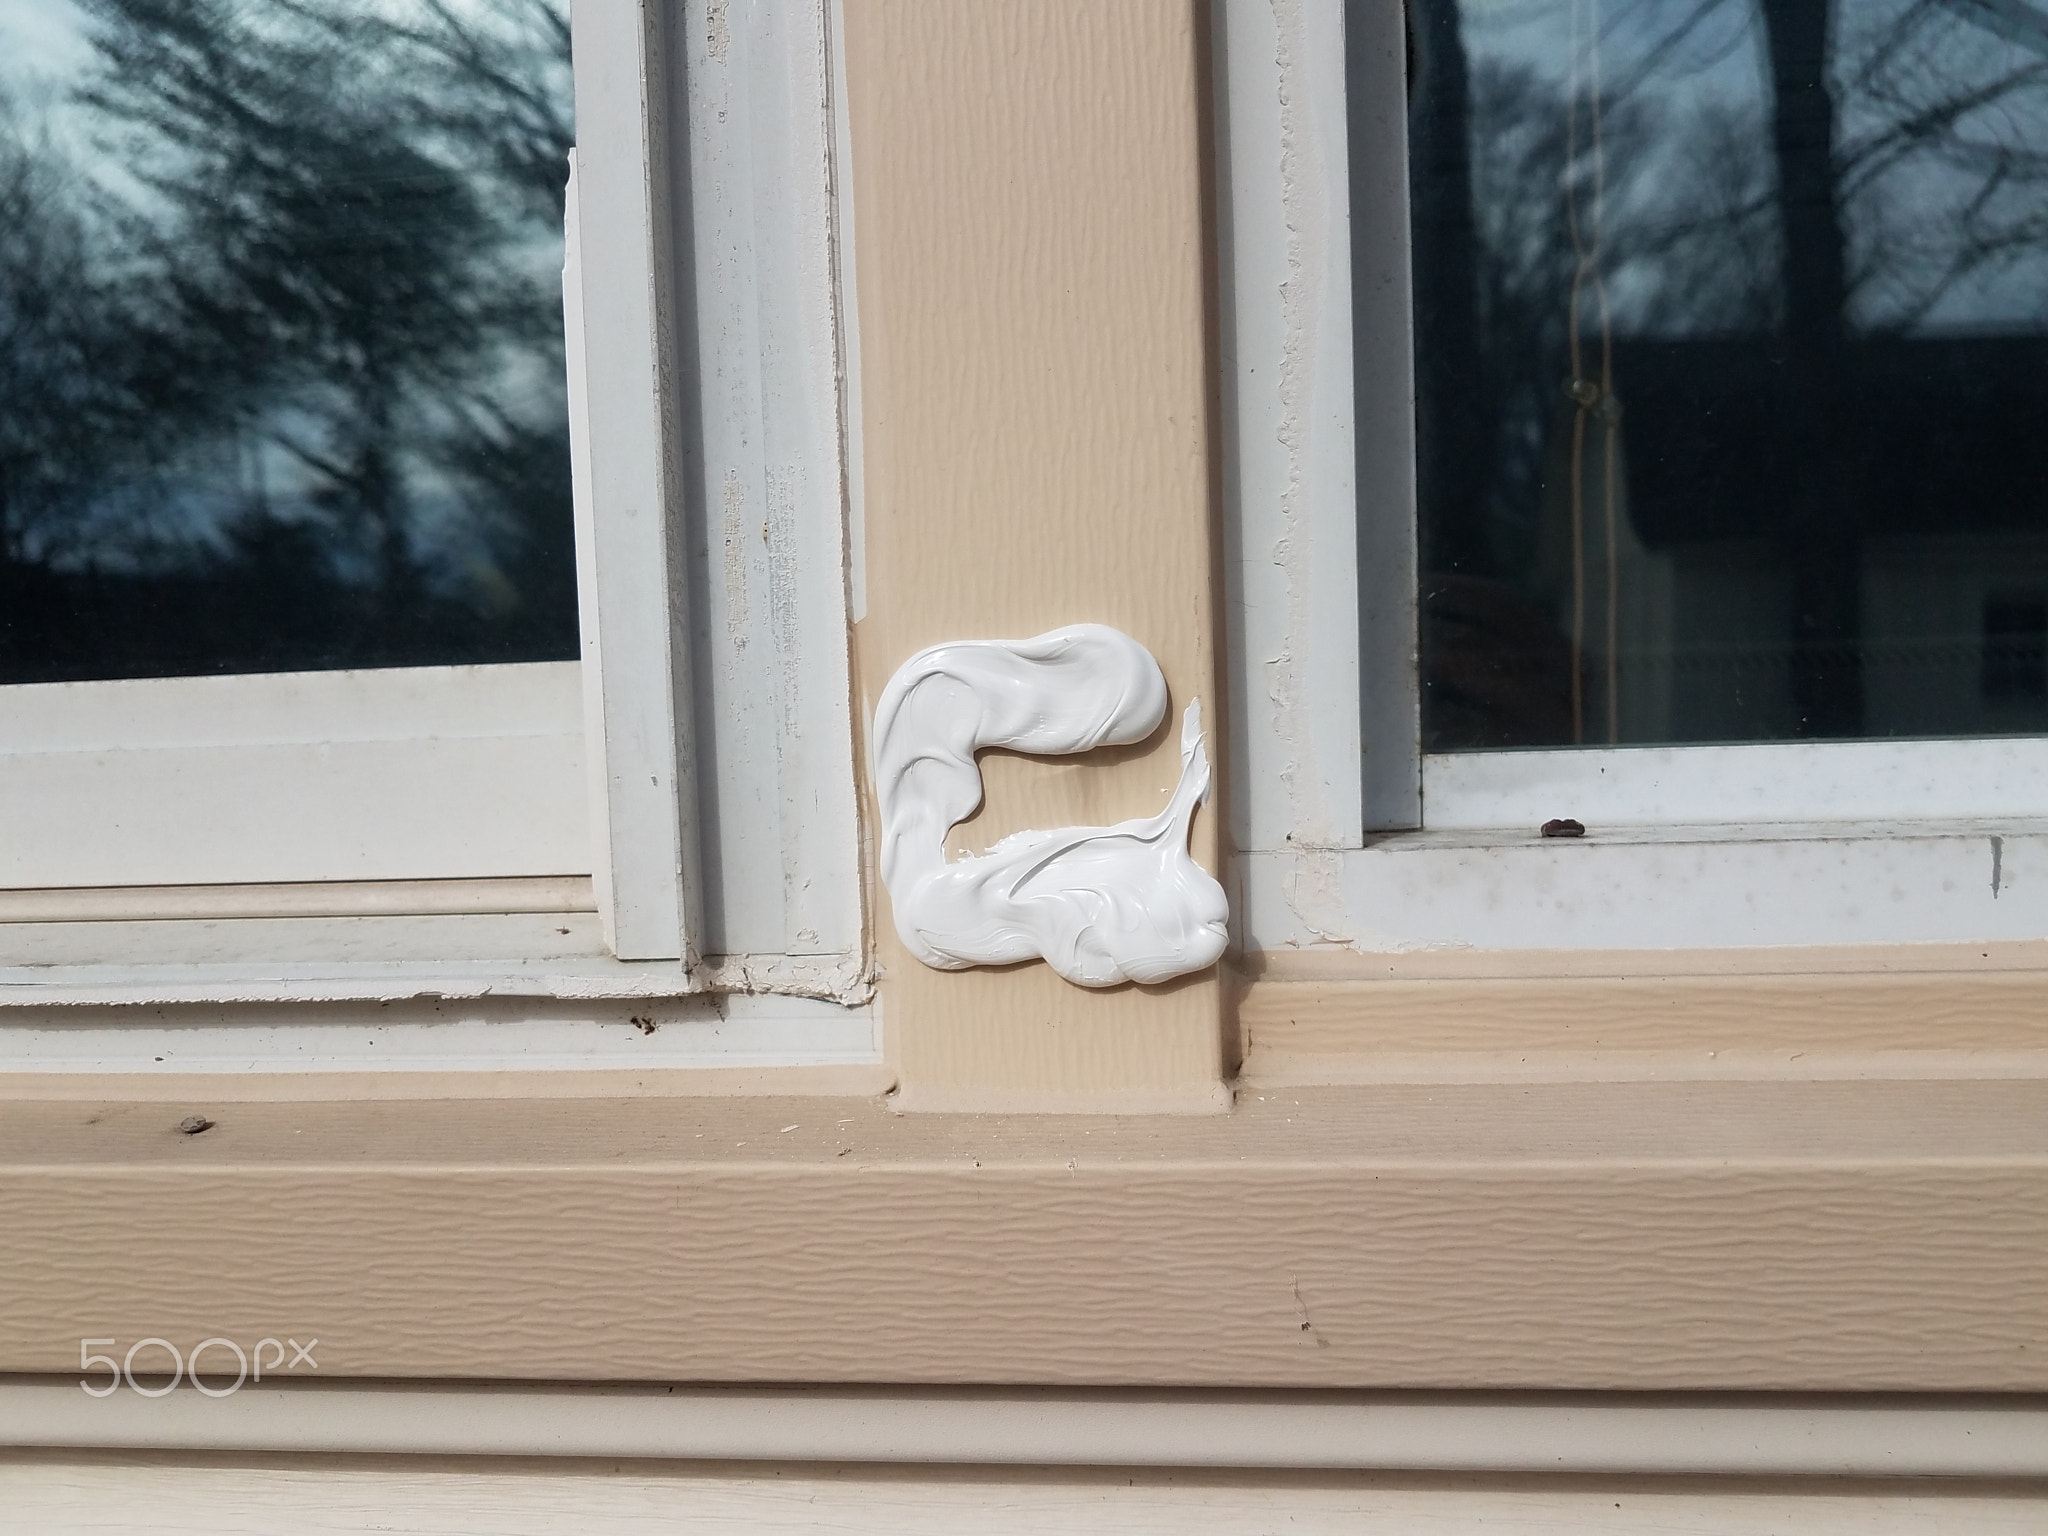 filled or repaired hole in damaged metal frame of window on house